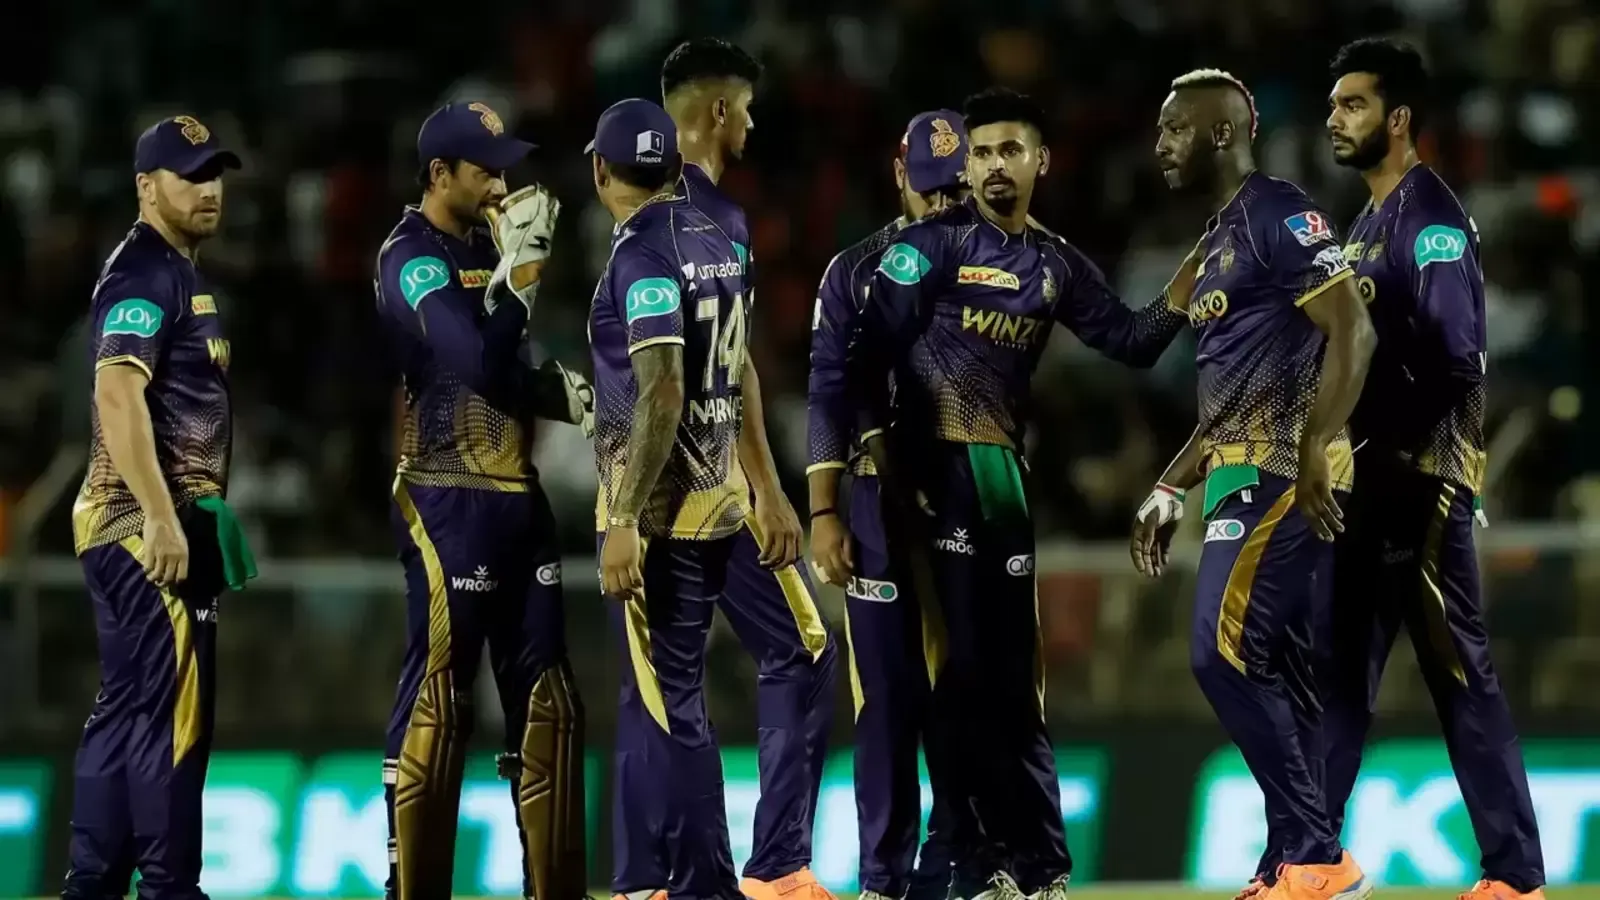 LSG Vs KKR IPL 2022 Match 53: Full Preview, Probable XIs, Pitch Report, And Dream11 Team Prediction | SportzPoint.com